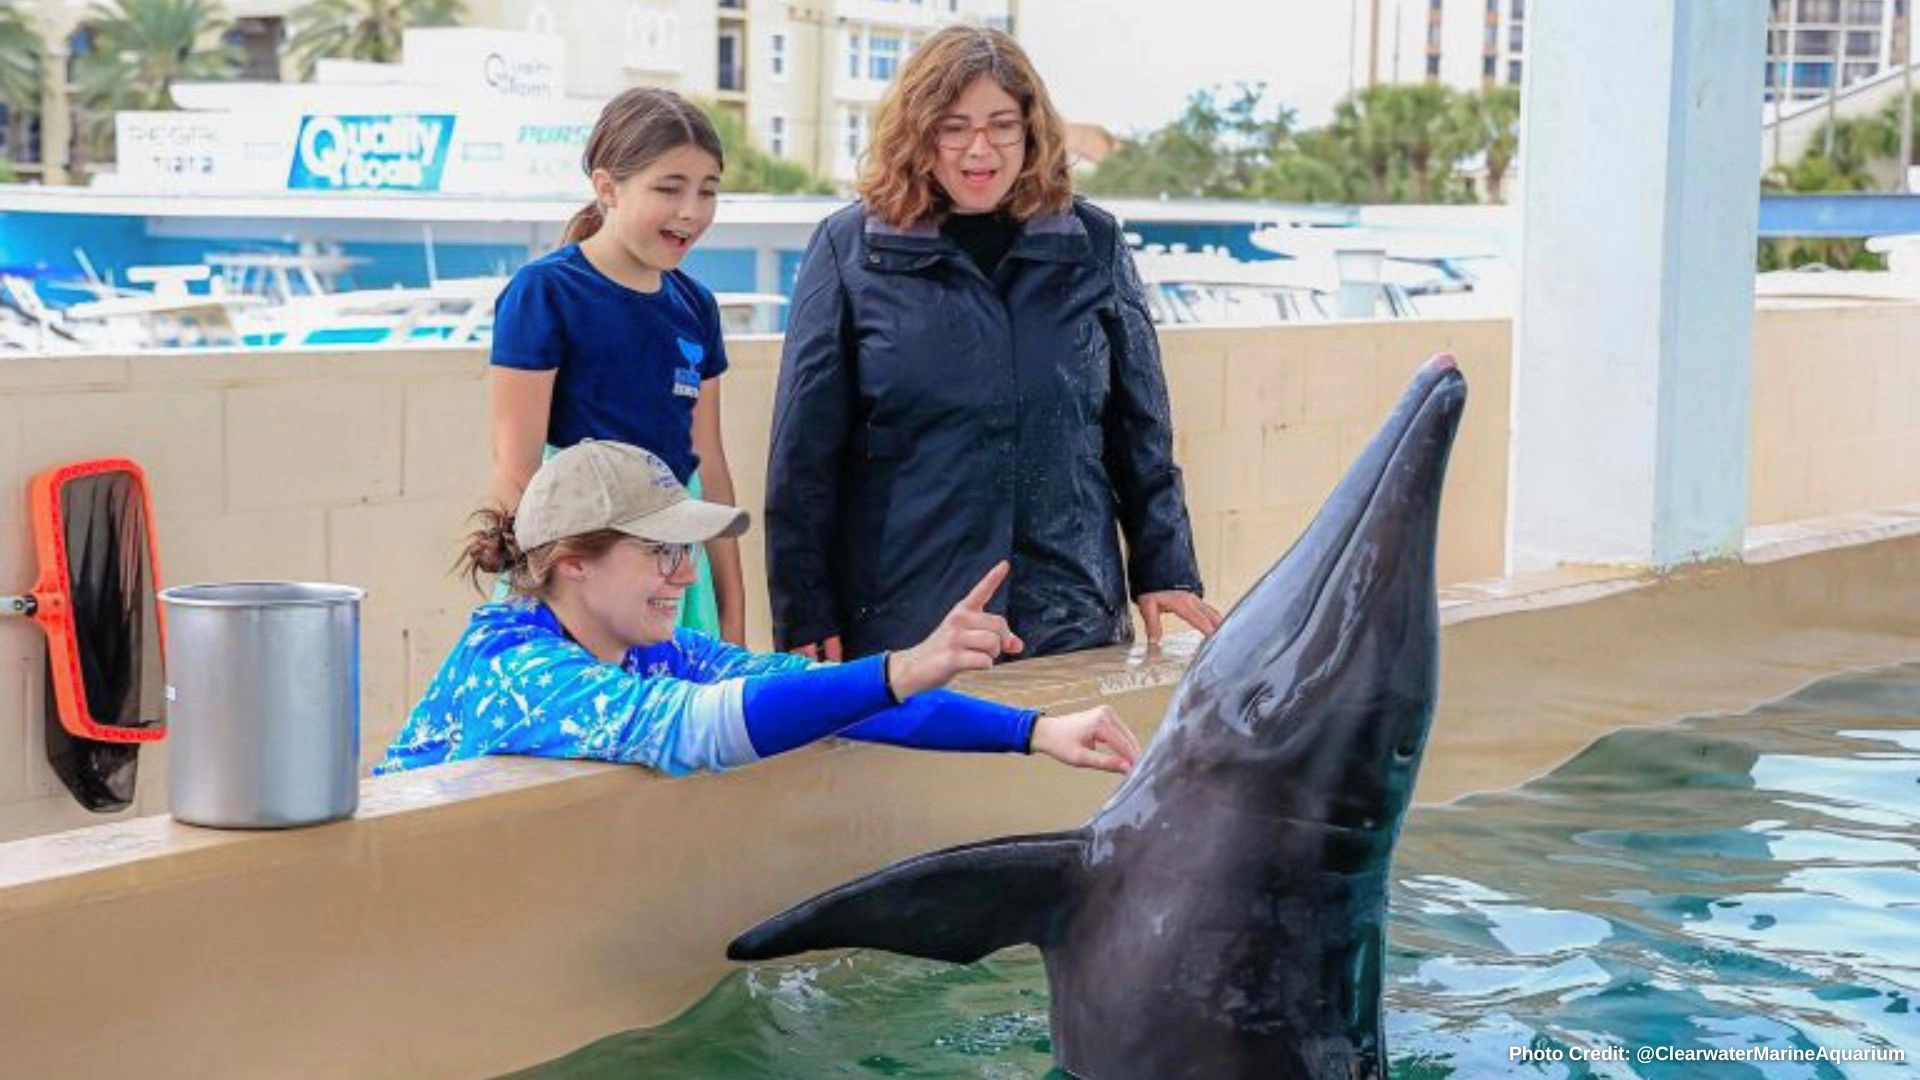 Trainer with Dolphin in pool at aquarium with mother and daughter